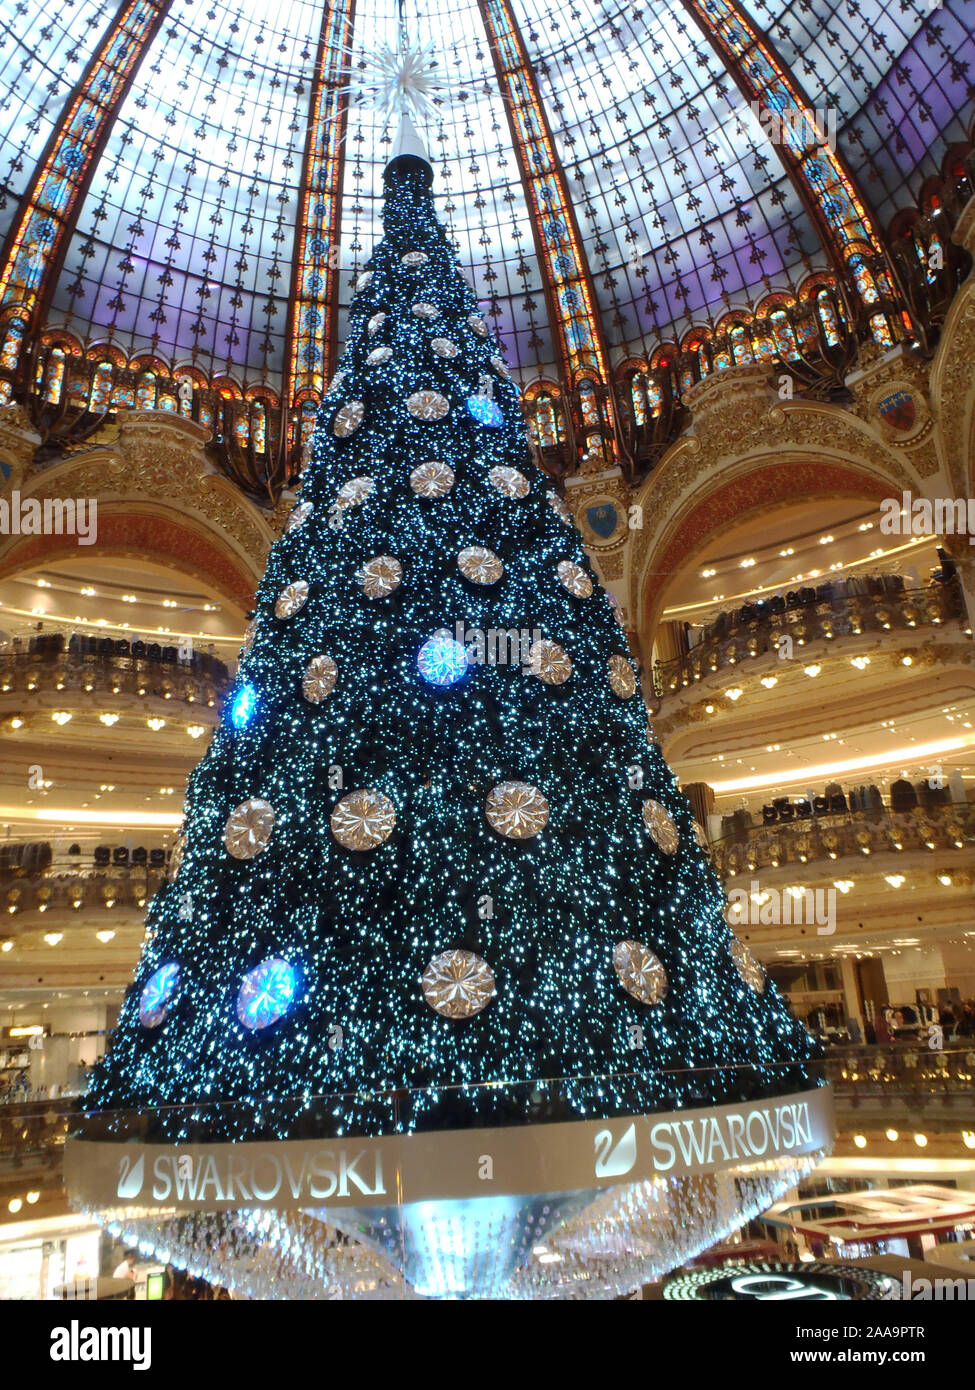 Paris, France - December 8, 2012: Swarovski christmas tree at the famous  Galeries Lafayette department store on the Boulevard Haussmann. The Ball of  t Stock Photo - Alamy